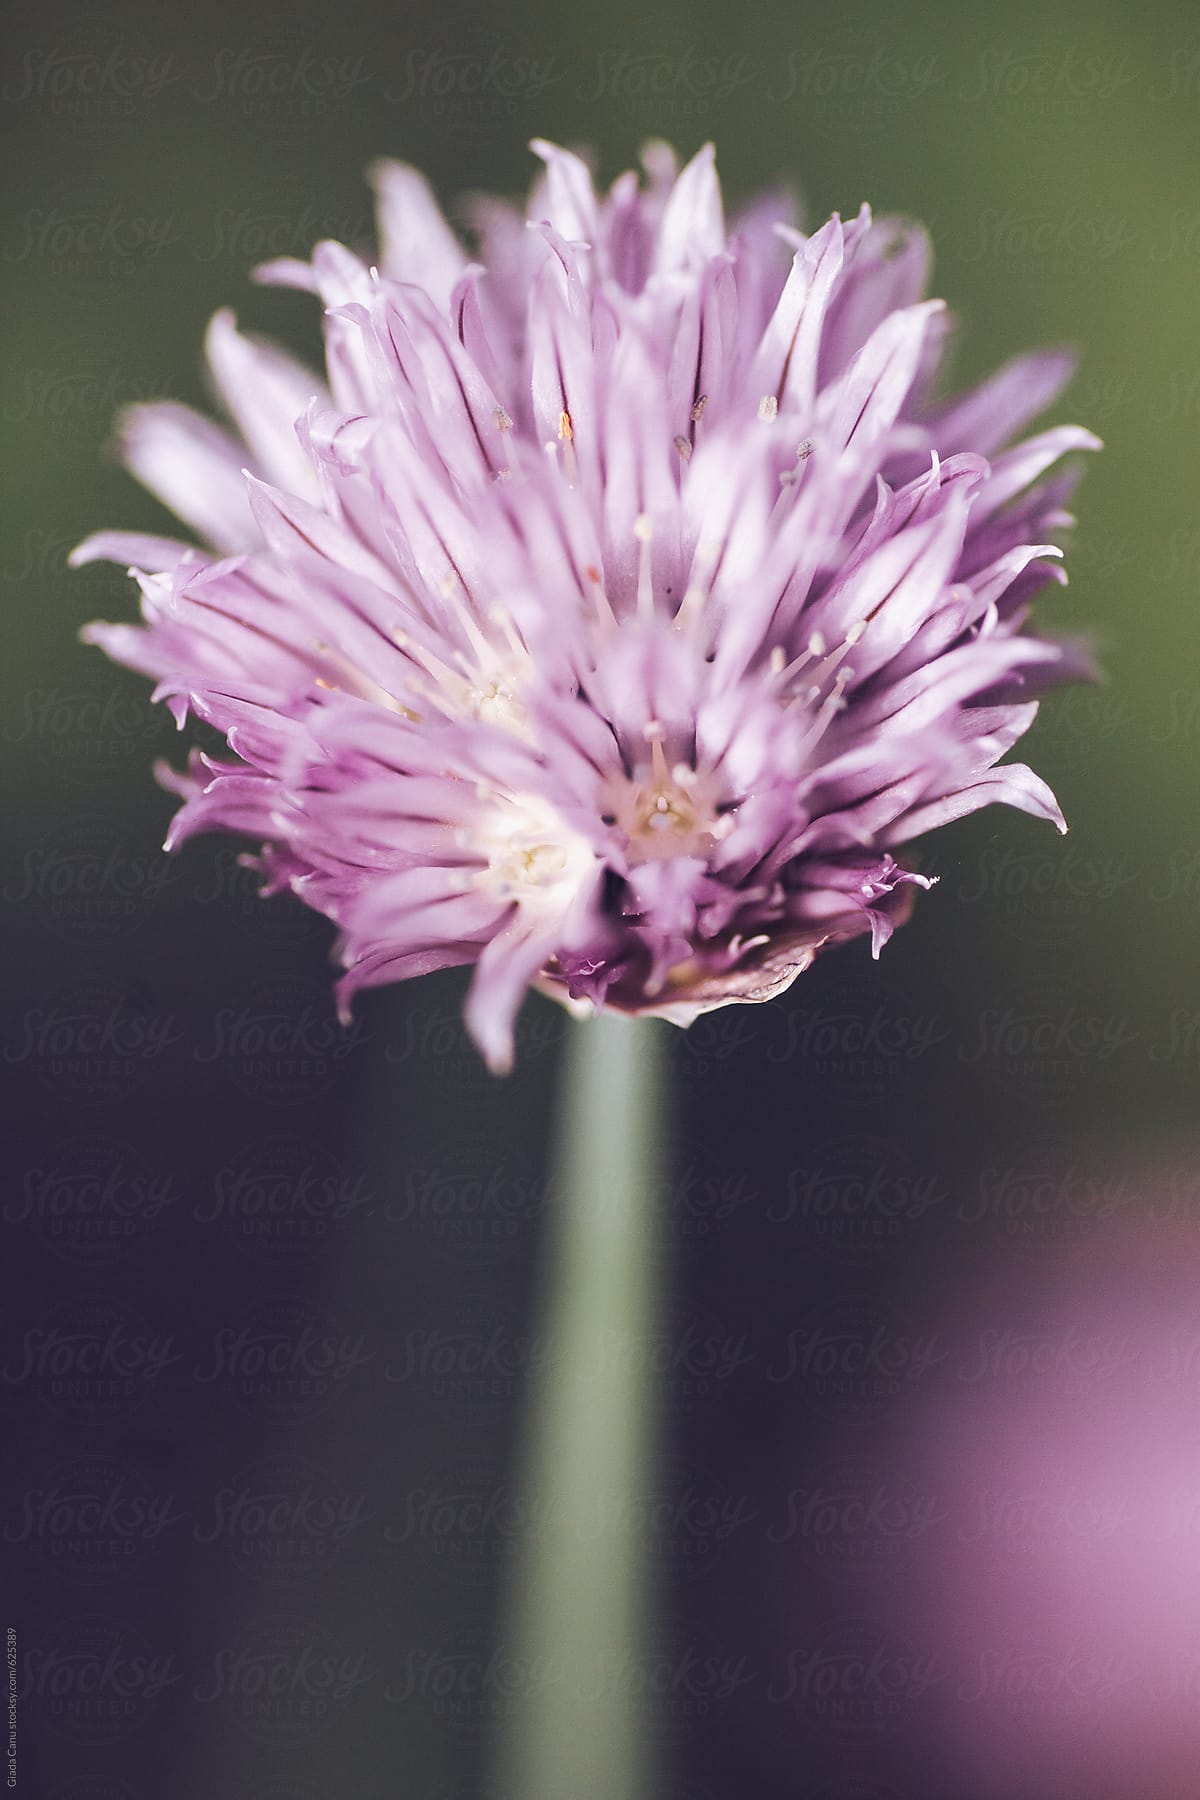 chives\' flowers